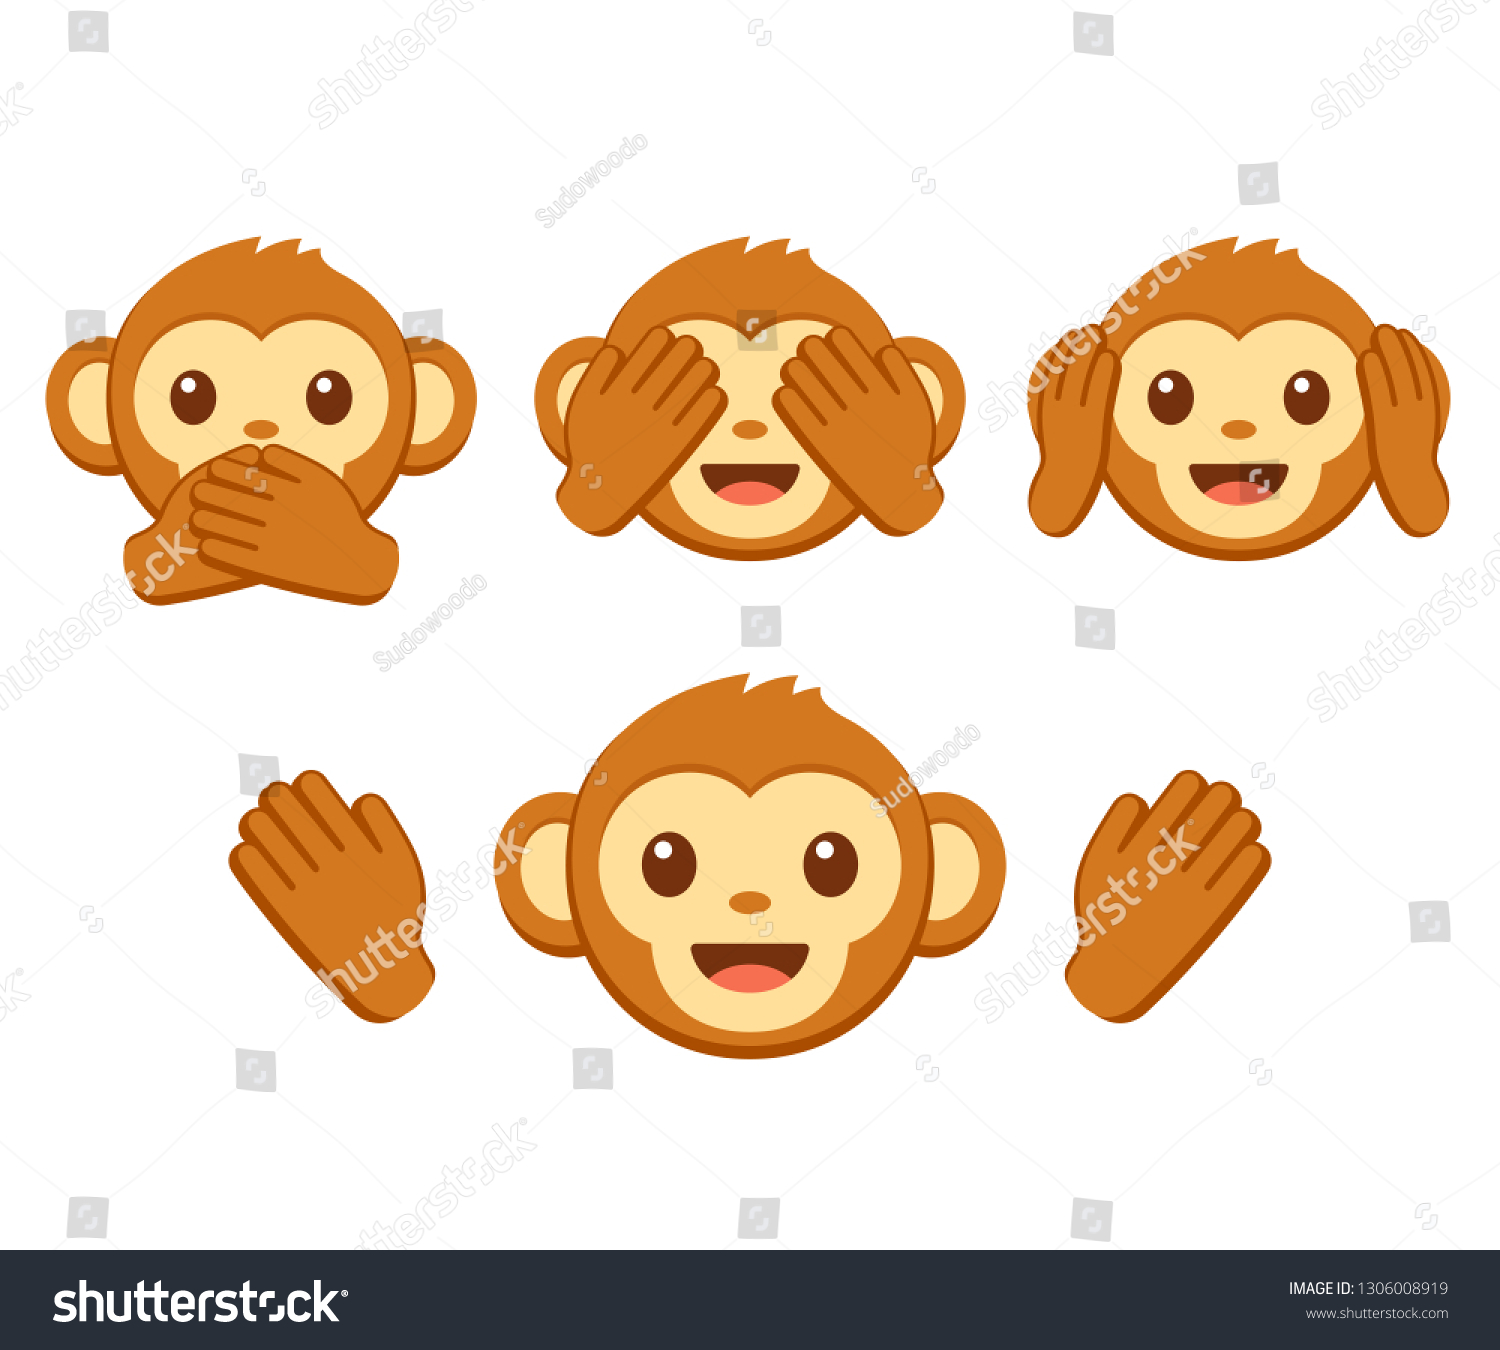 SVG of Cute cartoon monkey face emoji icon set. Three wise monkeys with hands covering eyes, ears and mouth: See no evil, hear no evil, speak no evil. Simple vector illustration. svg